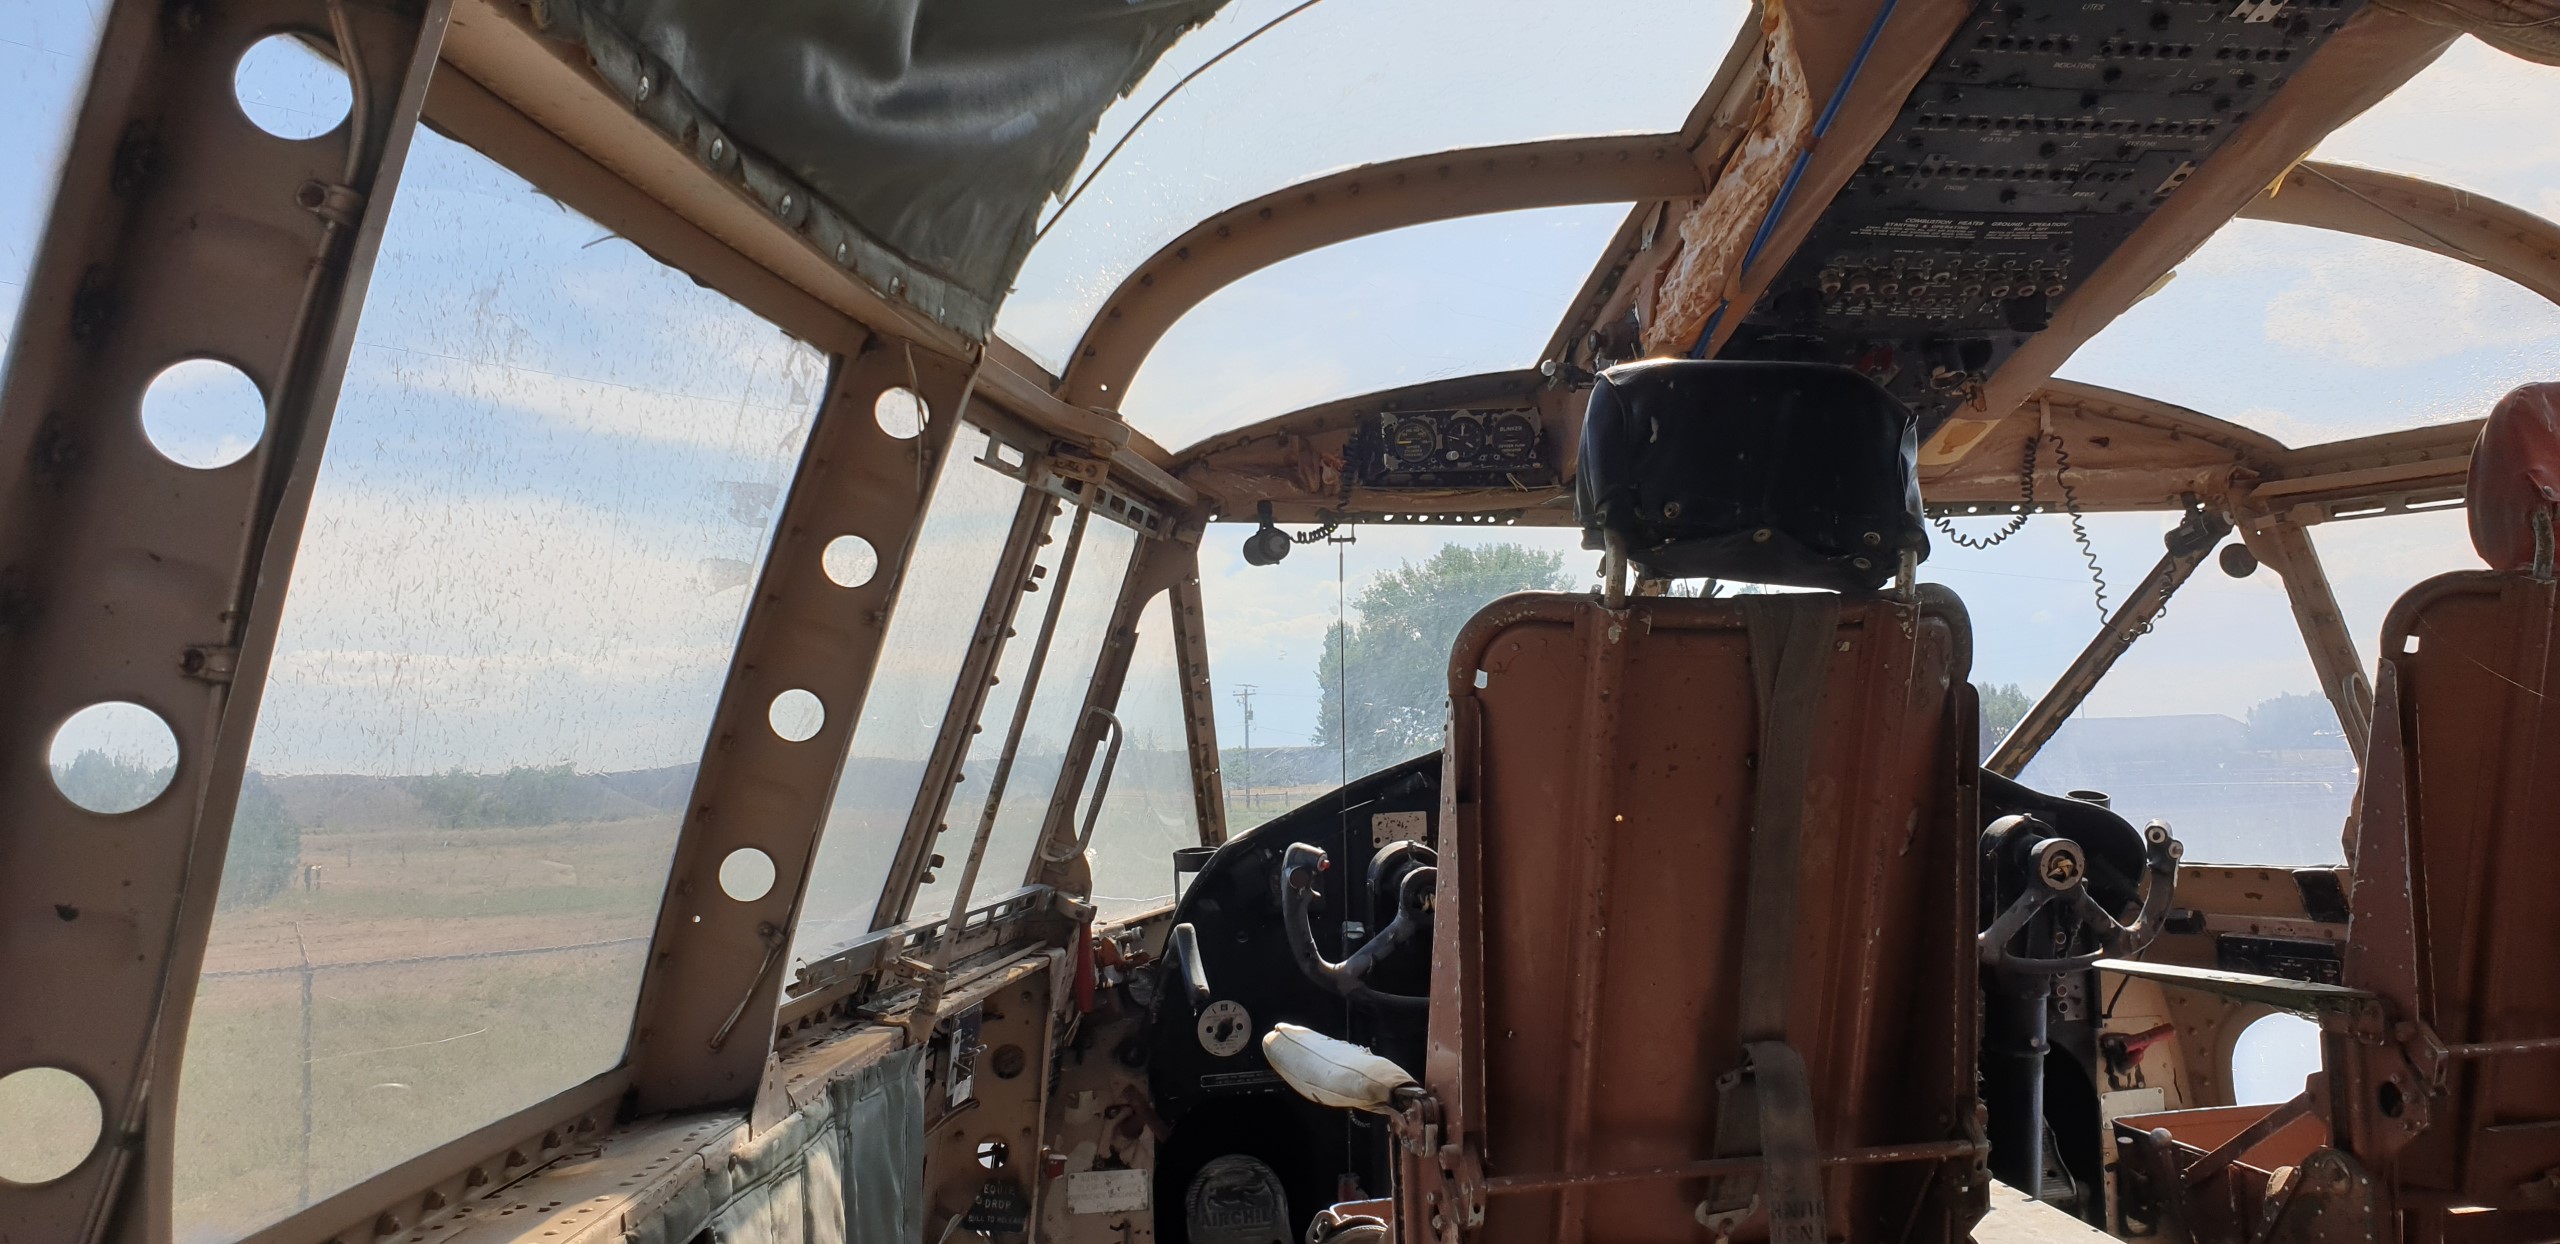 The cockpit of one of the aircraft